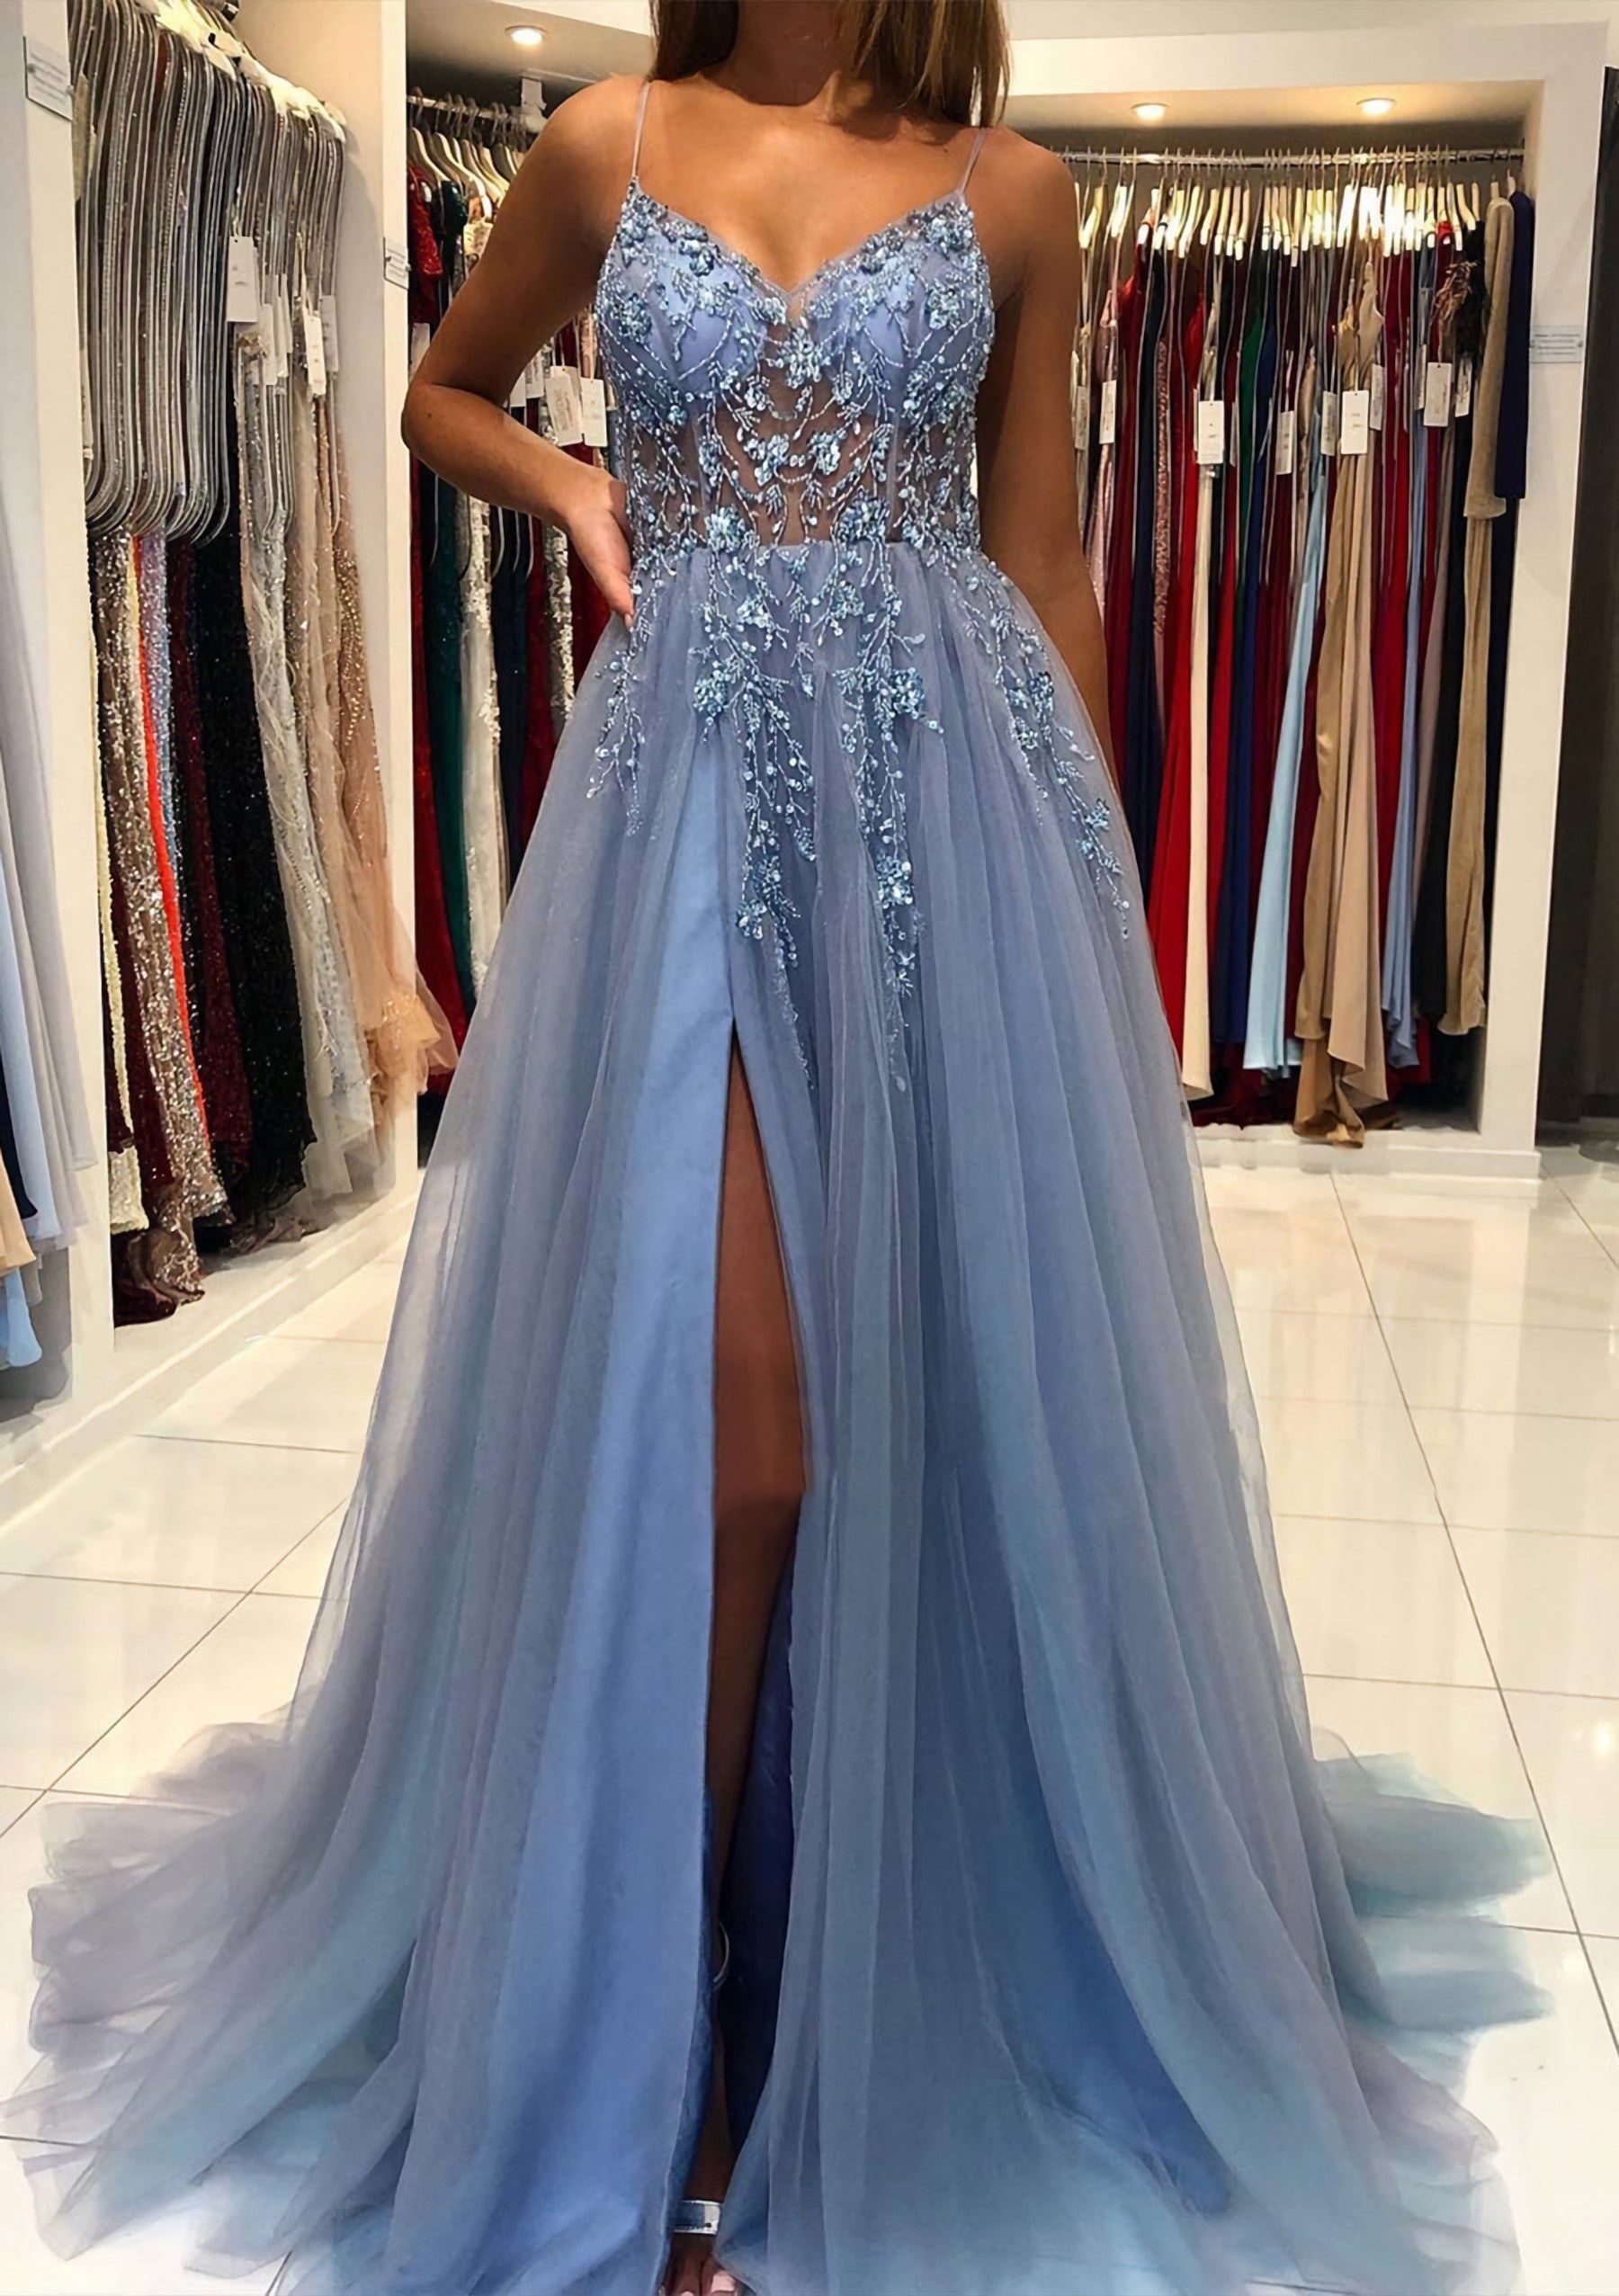 A Line V Neck Spaghetti Straps Sweep Train Tulle Prom Dress With Beading Sequins Split